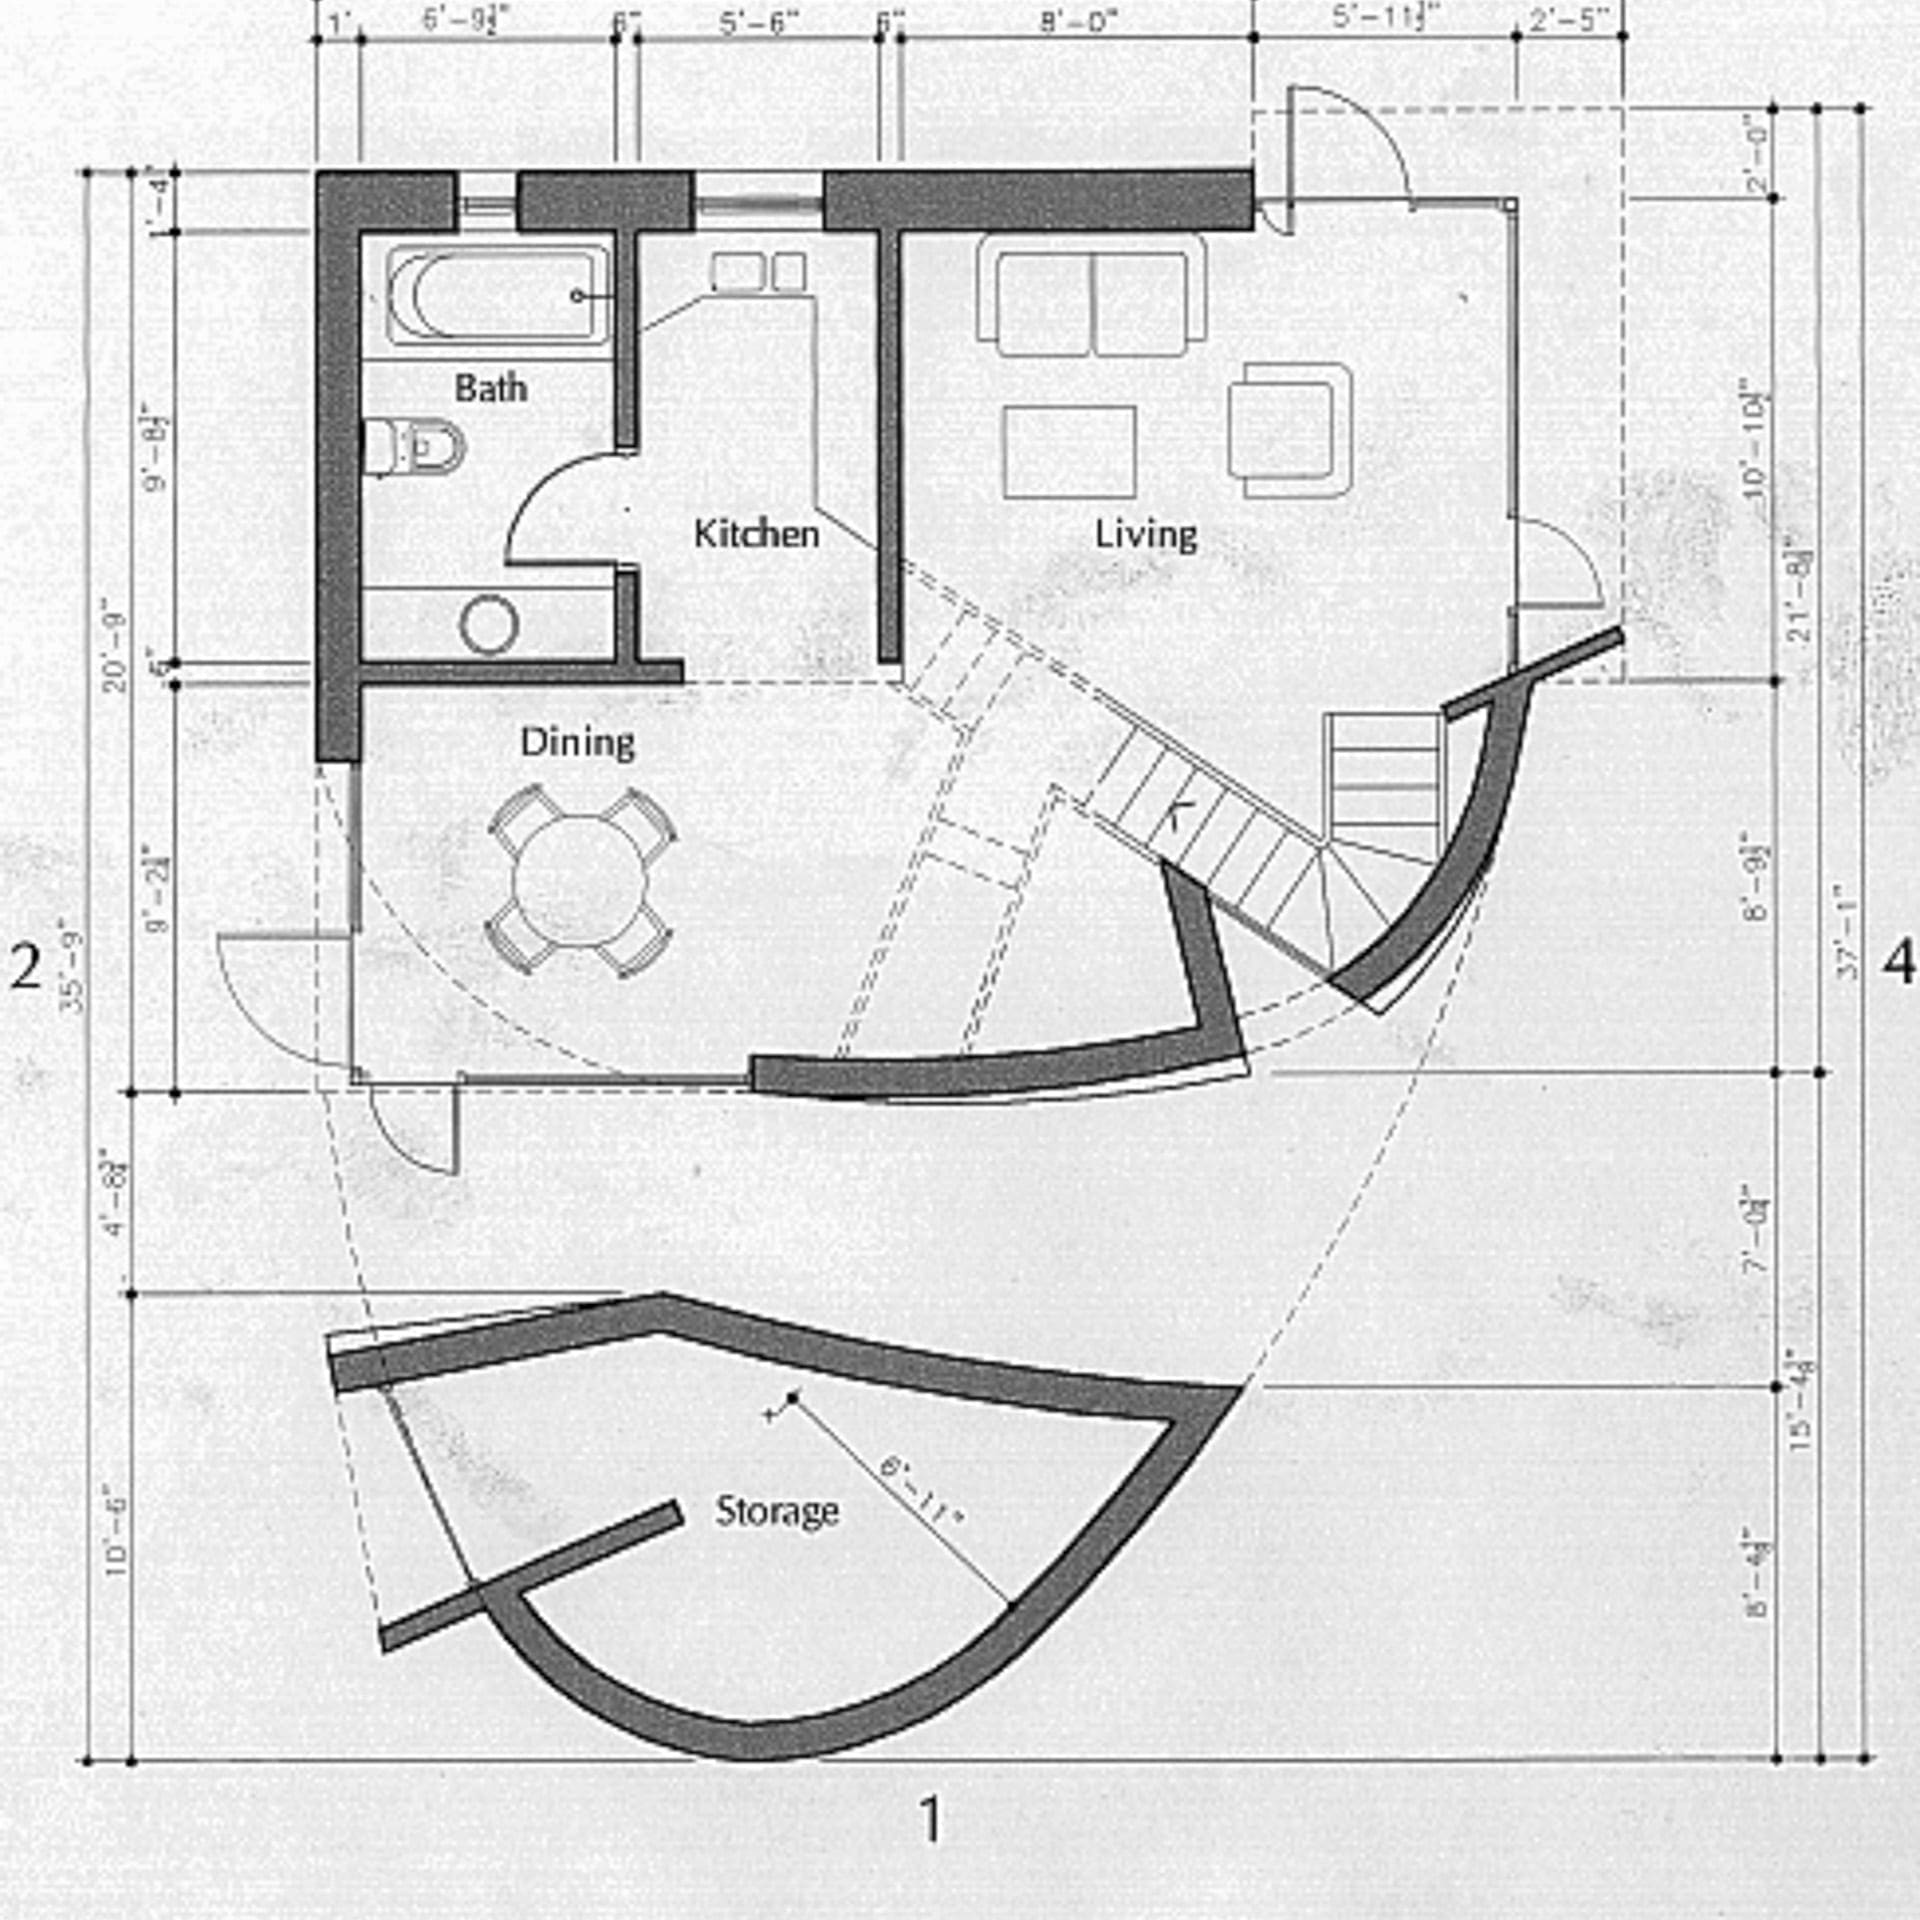 Drawings of the Turbulence House.